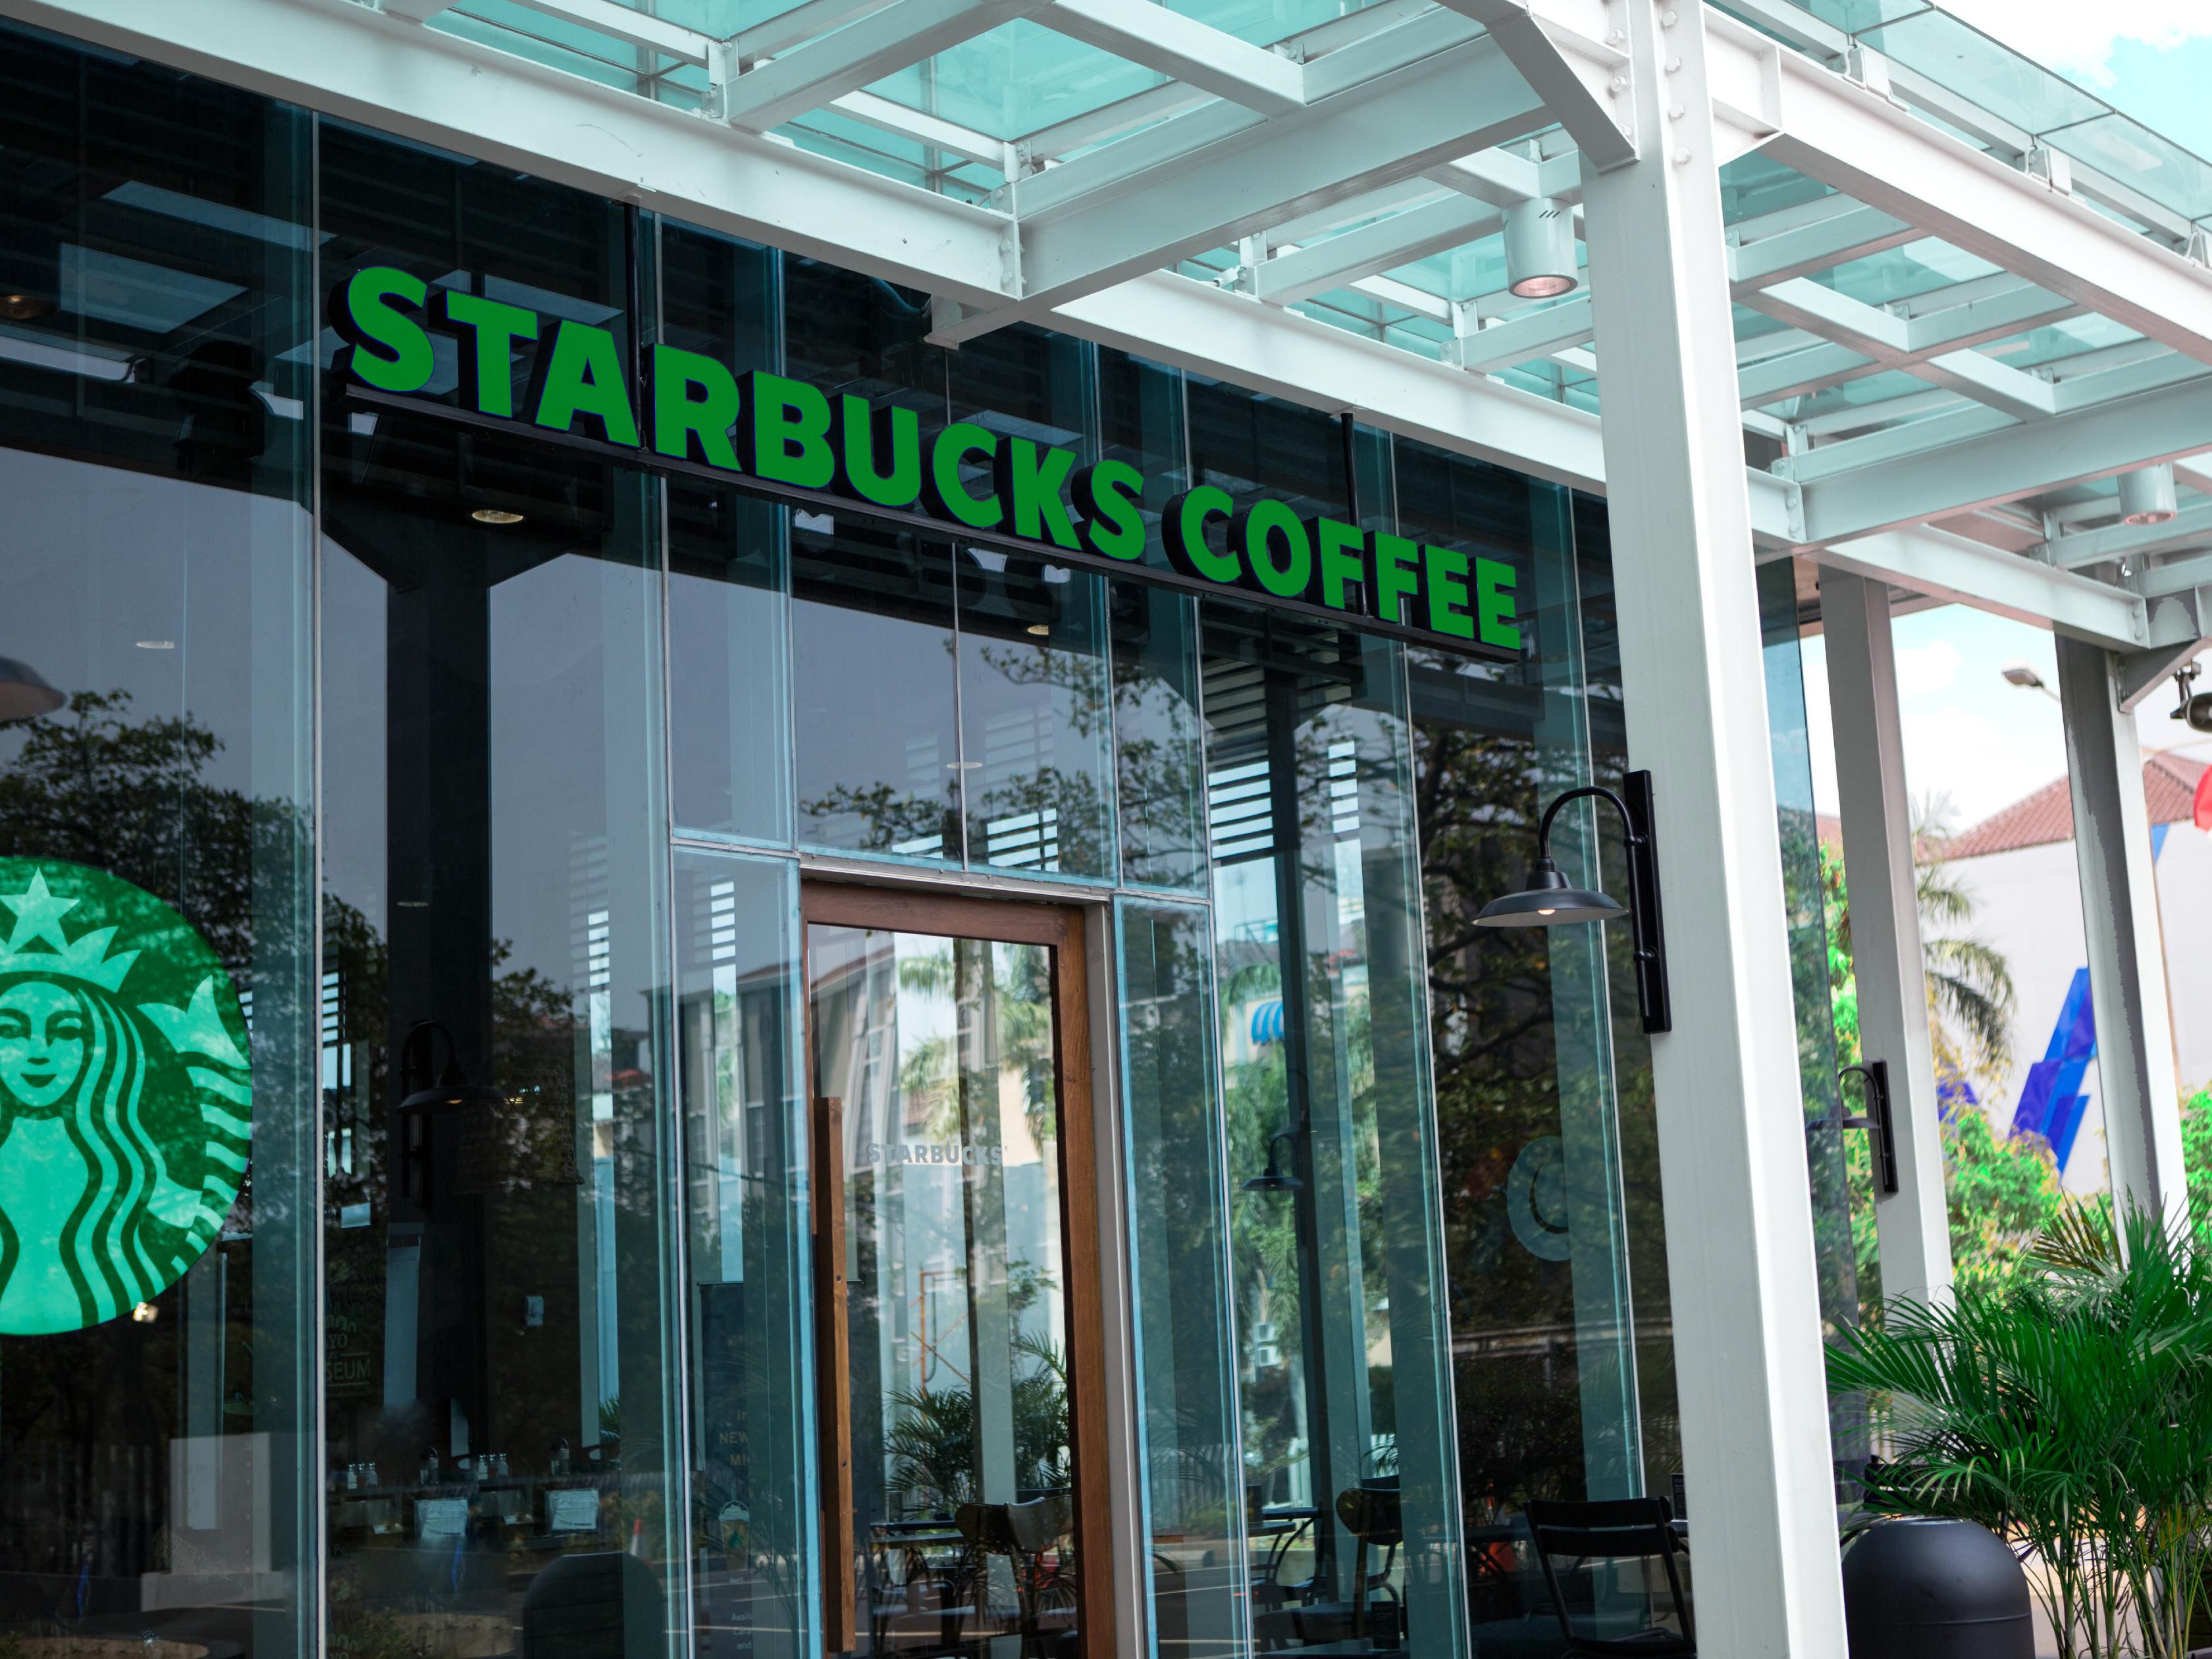 Starbucks Coffee is just steps away from our lobby